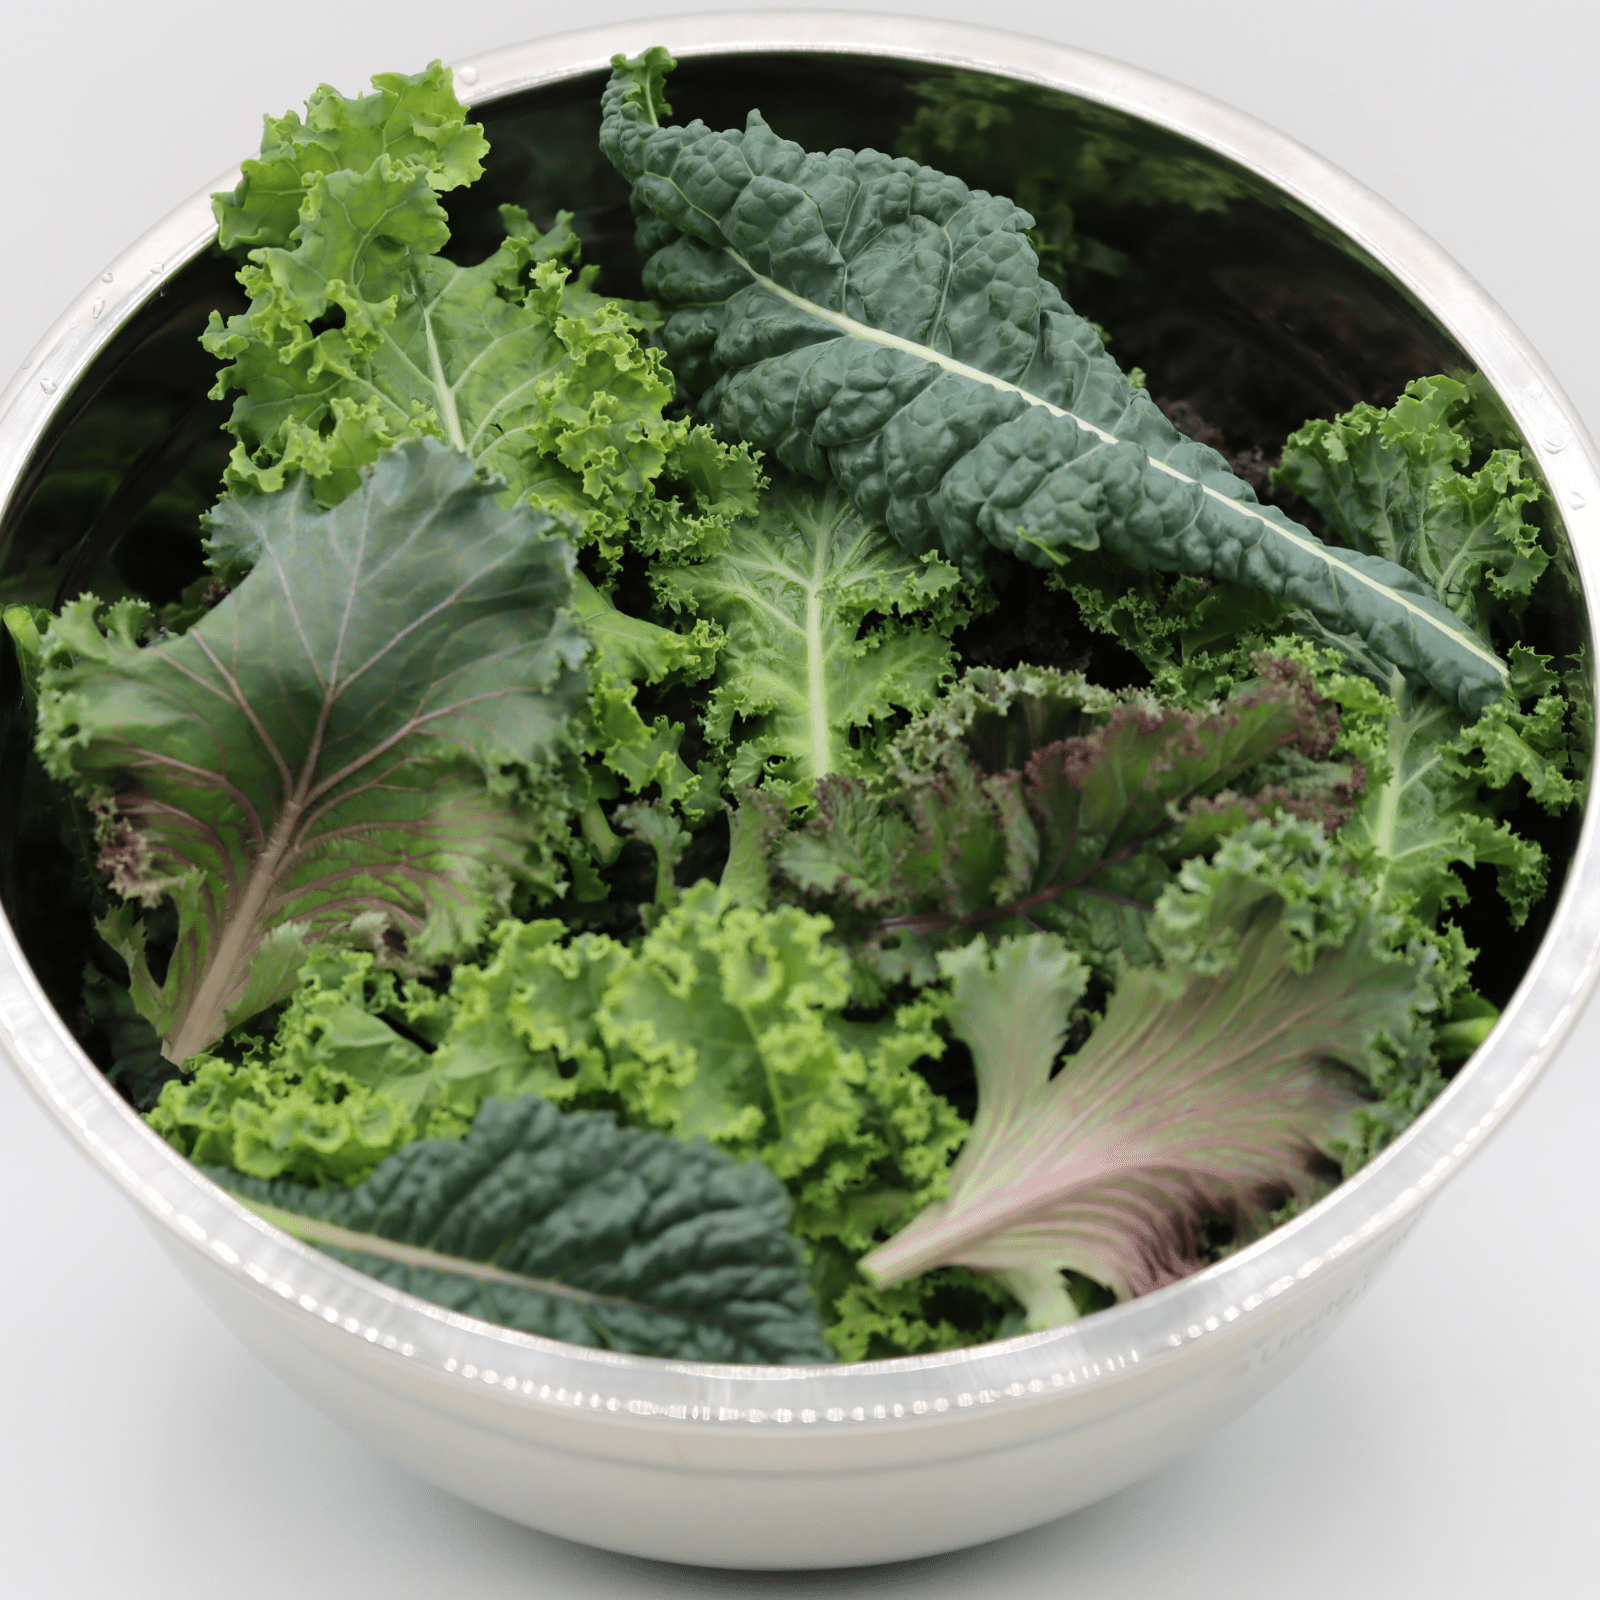 Mixed Greens - Kale Only